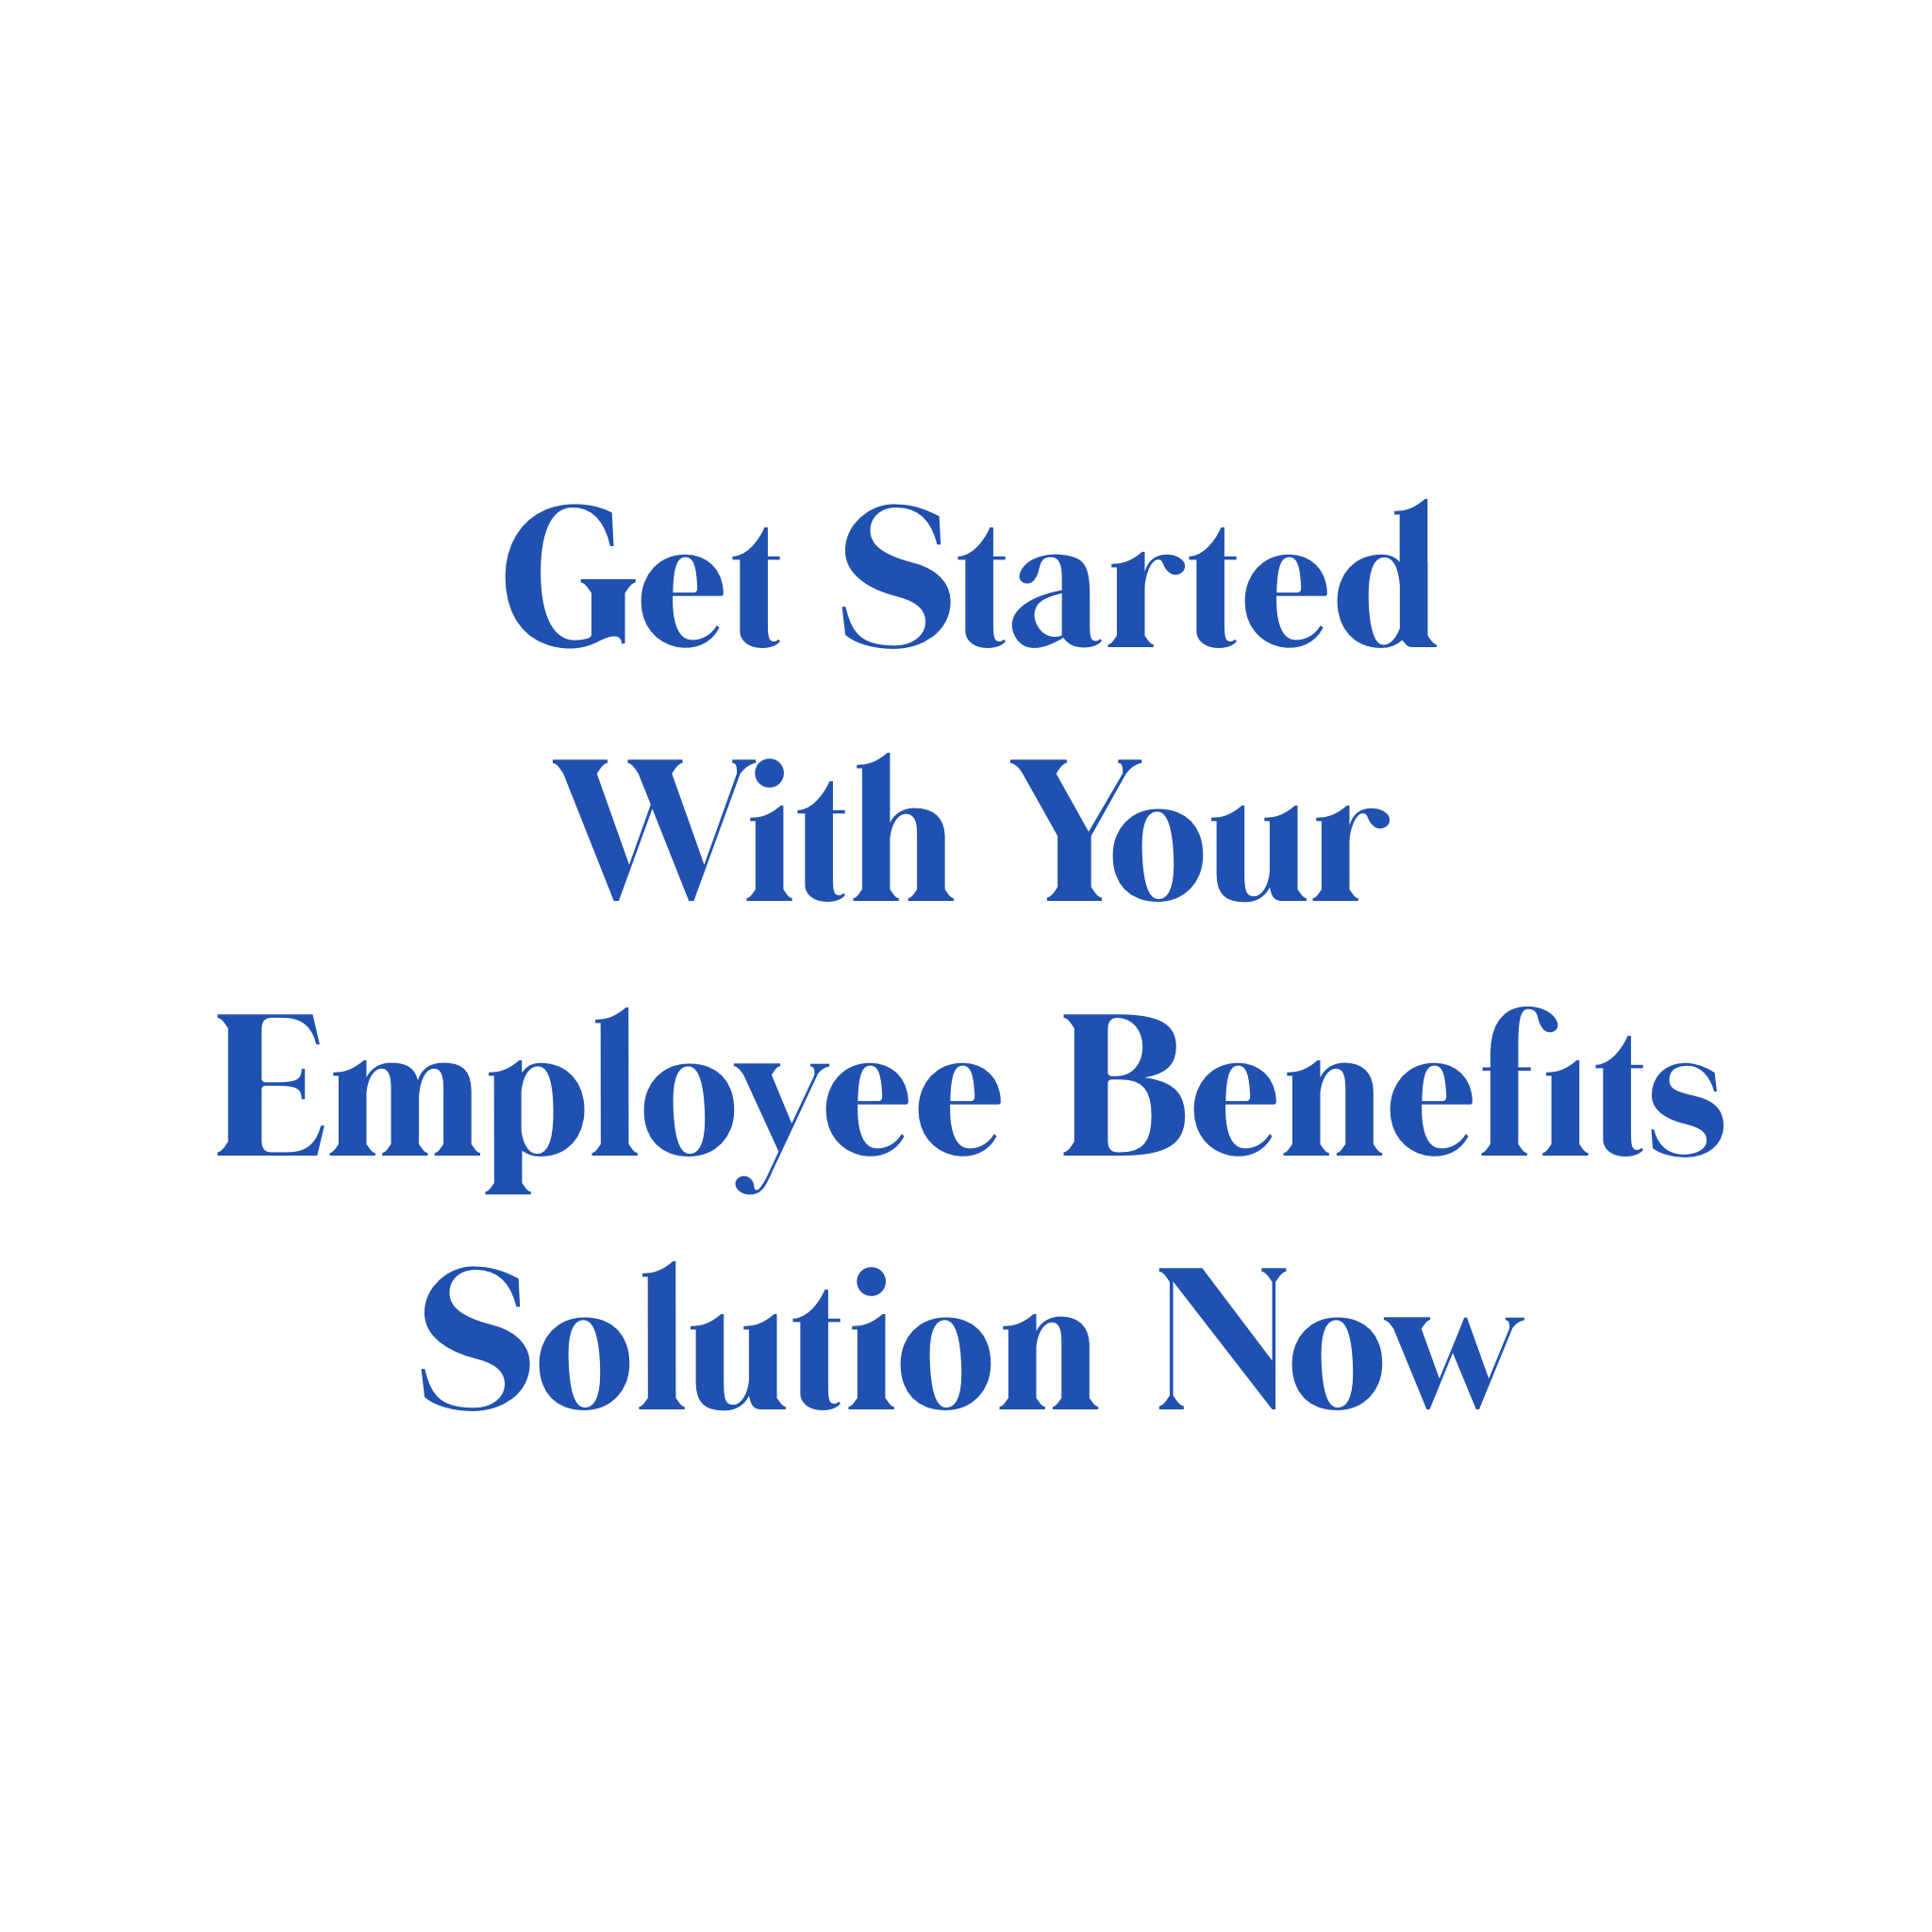 Request Employee Benefits Proposal